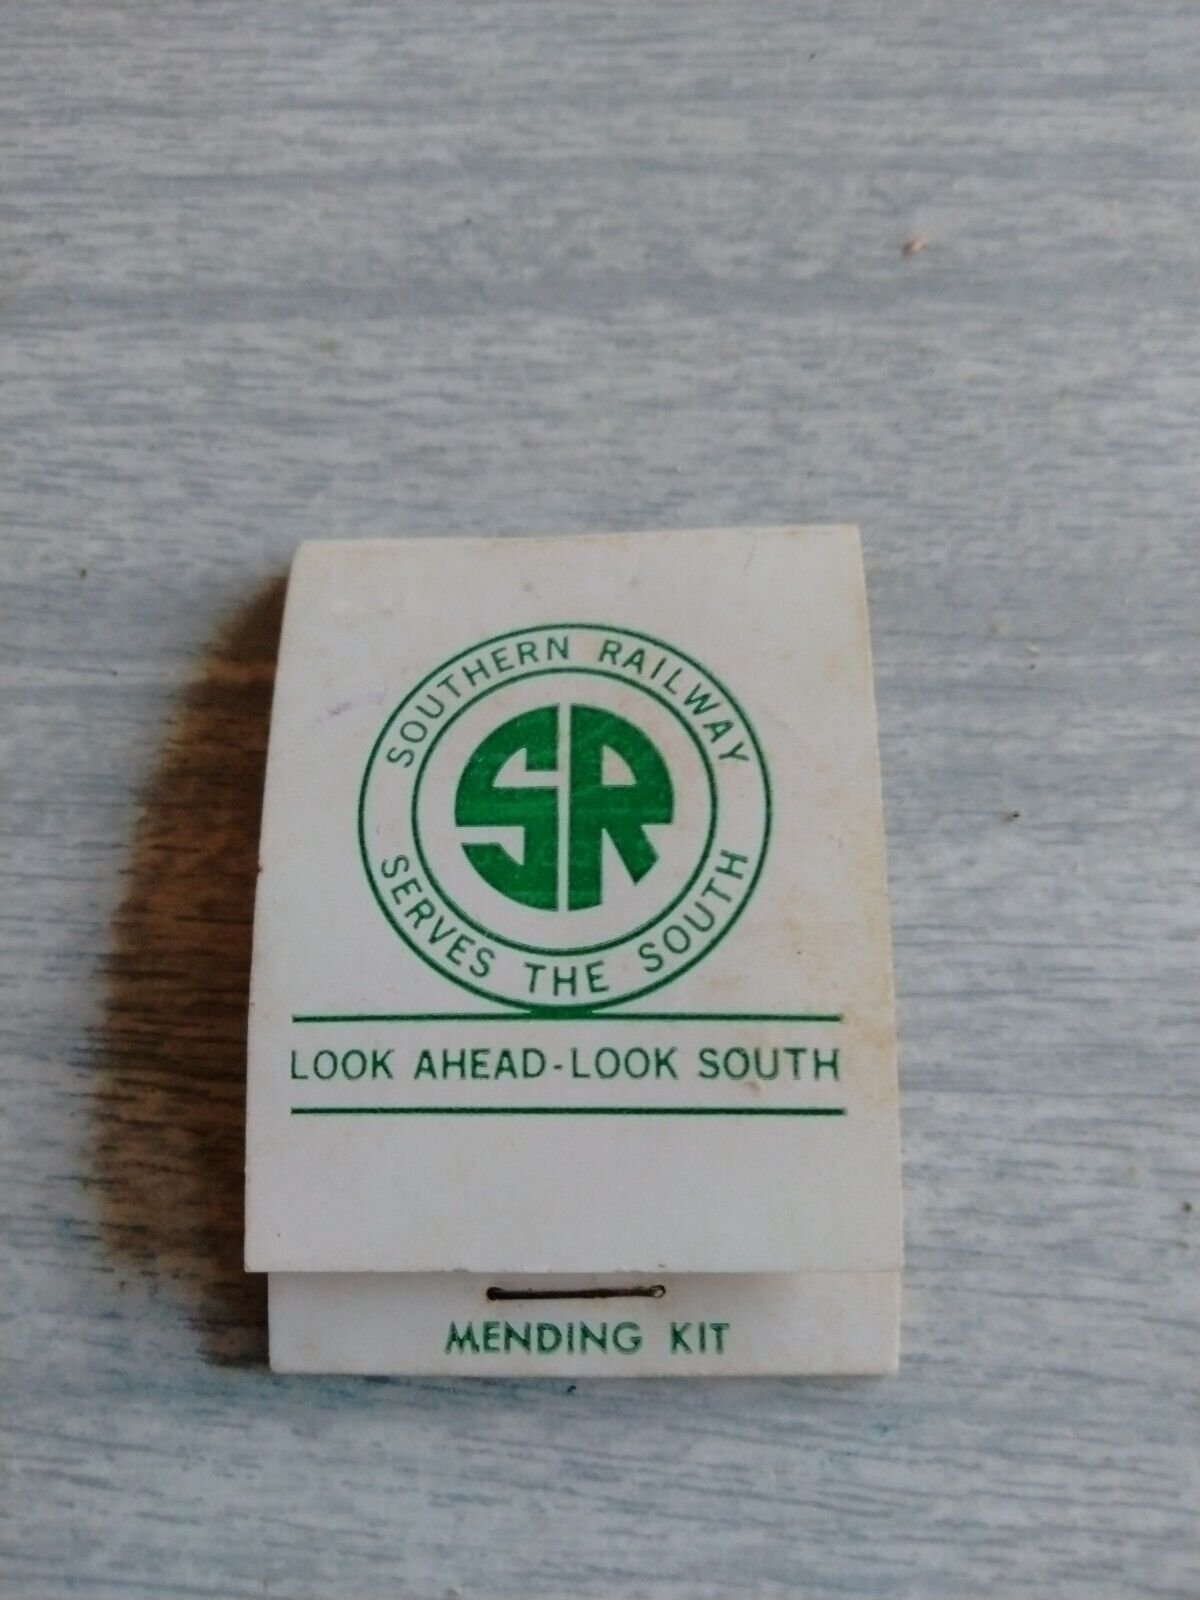 Vintage Southern Railway Promotional Sewing Kit.   A2